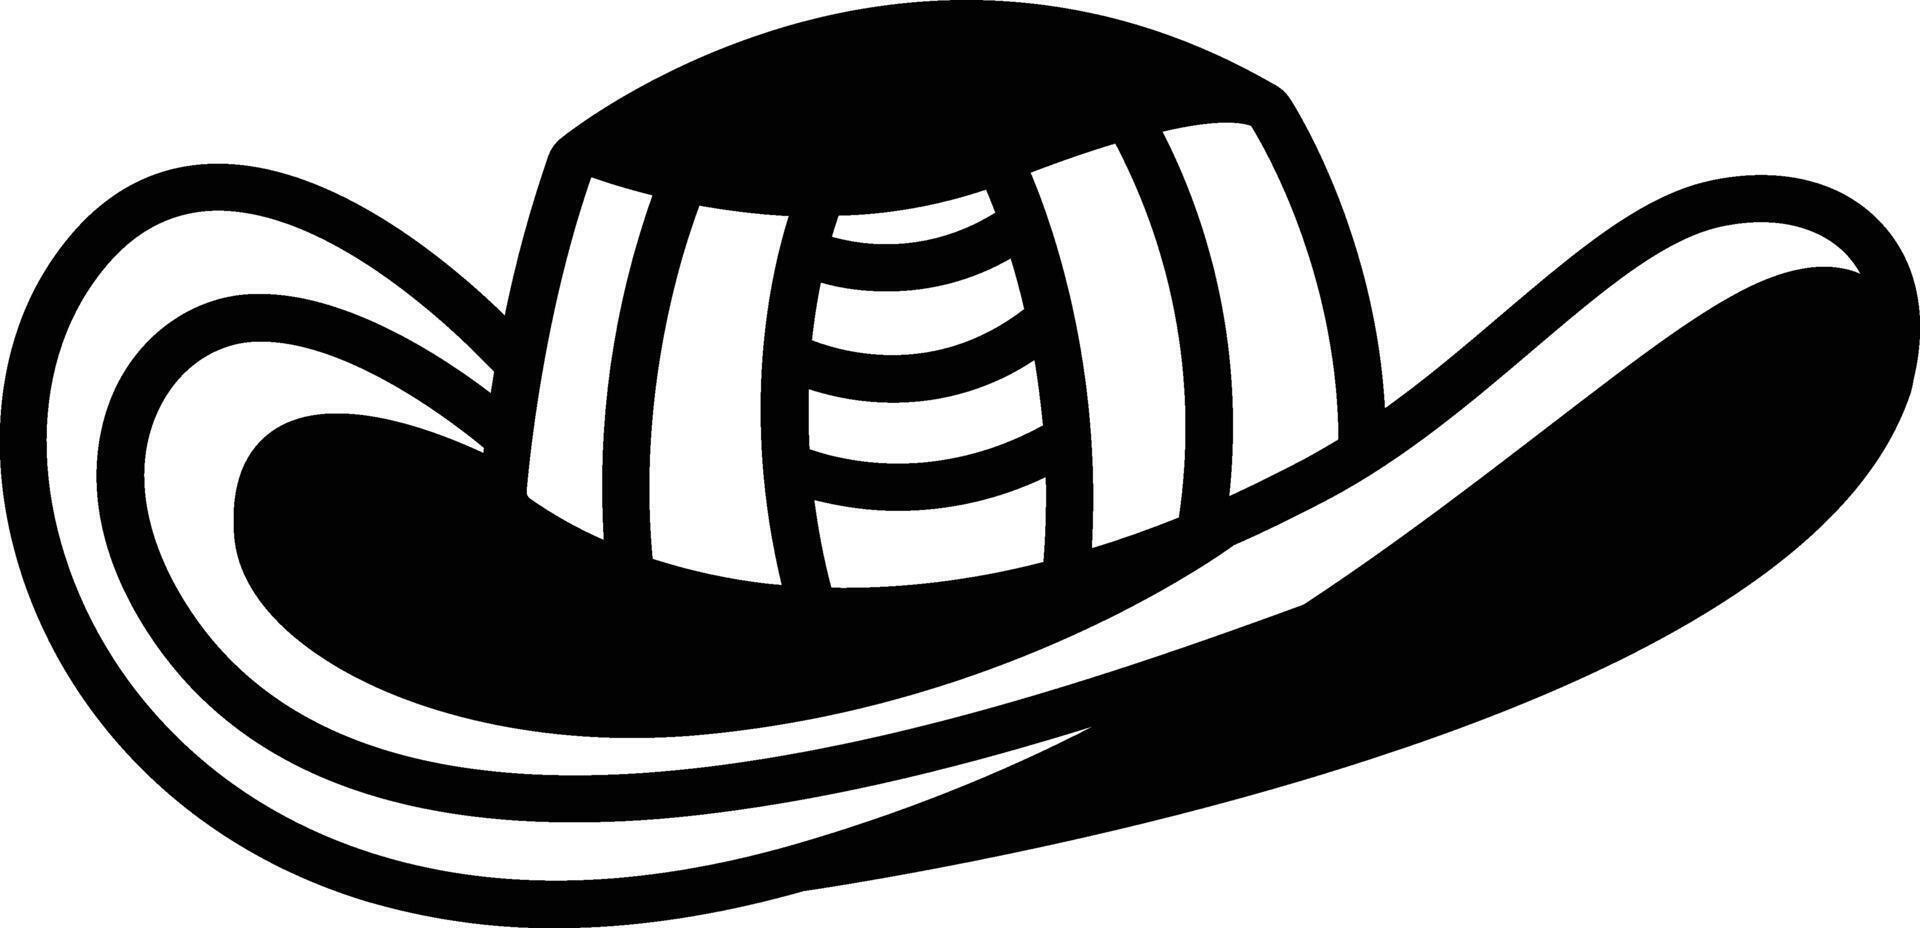 Hat glyph and line vector illustration